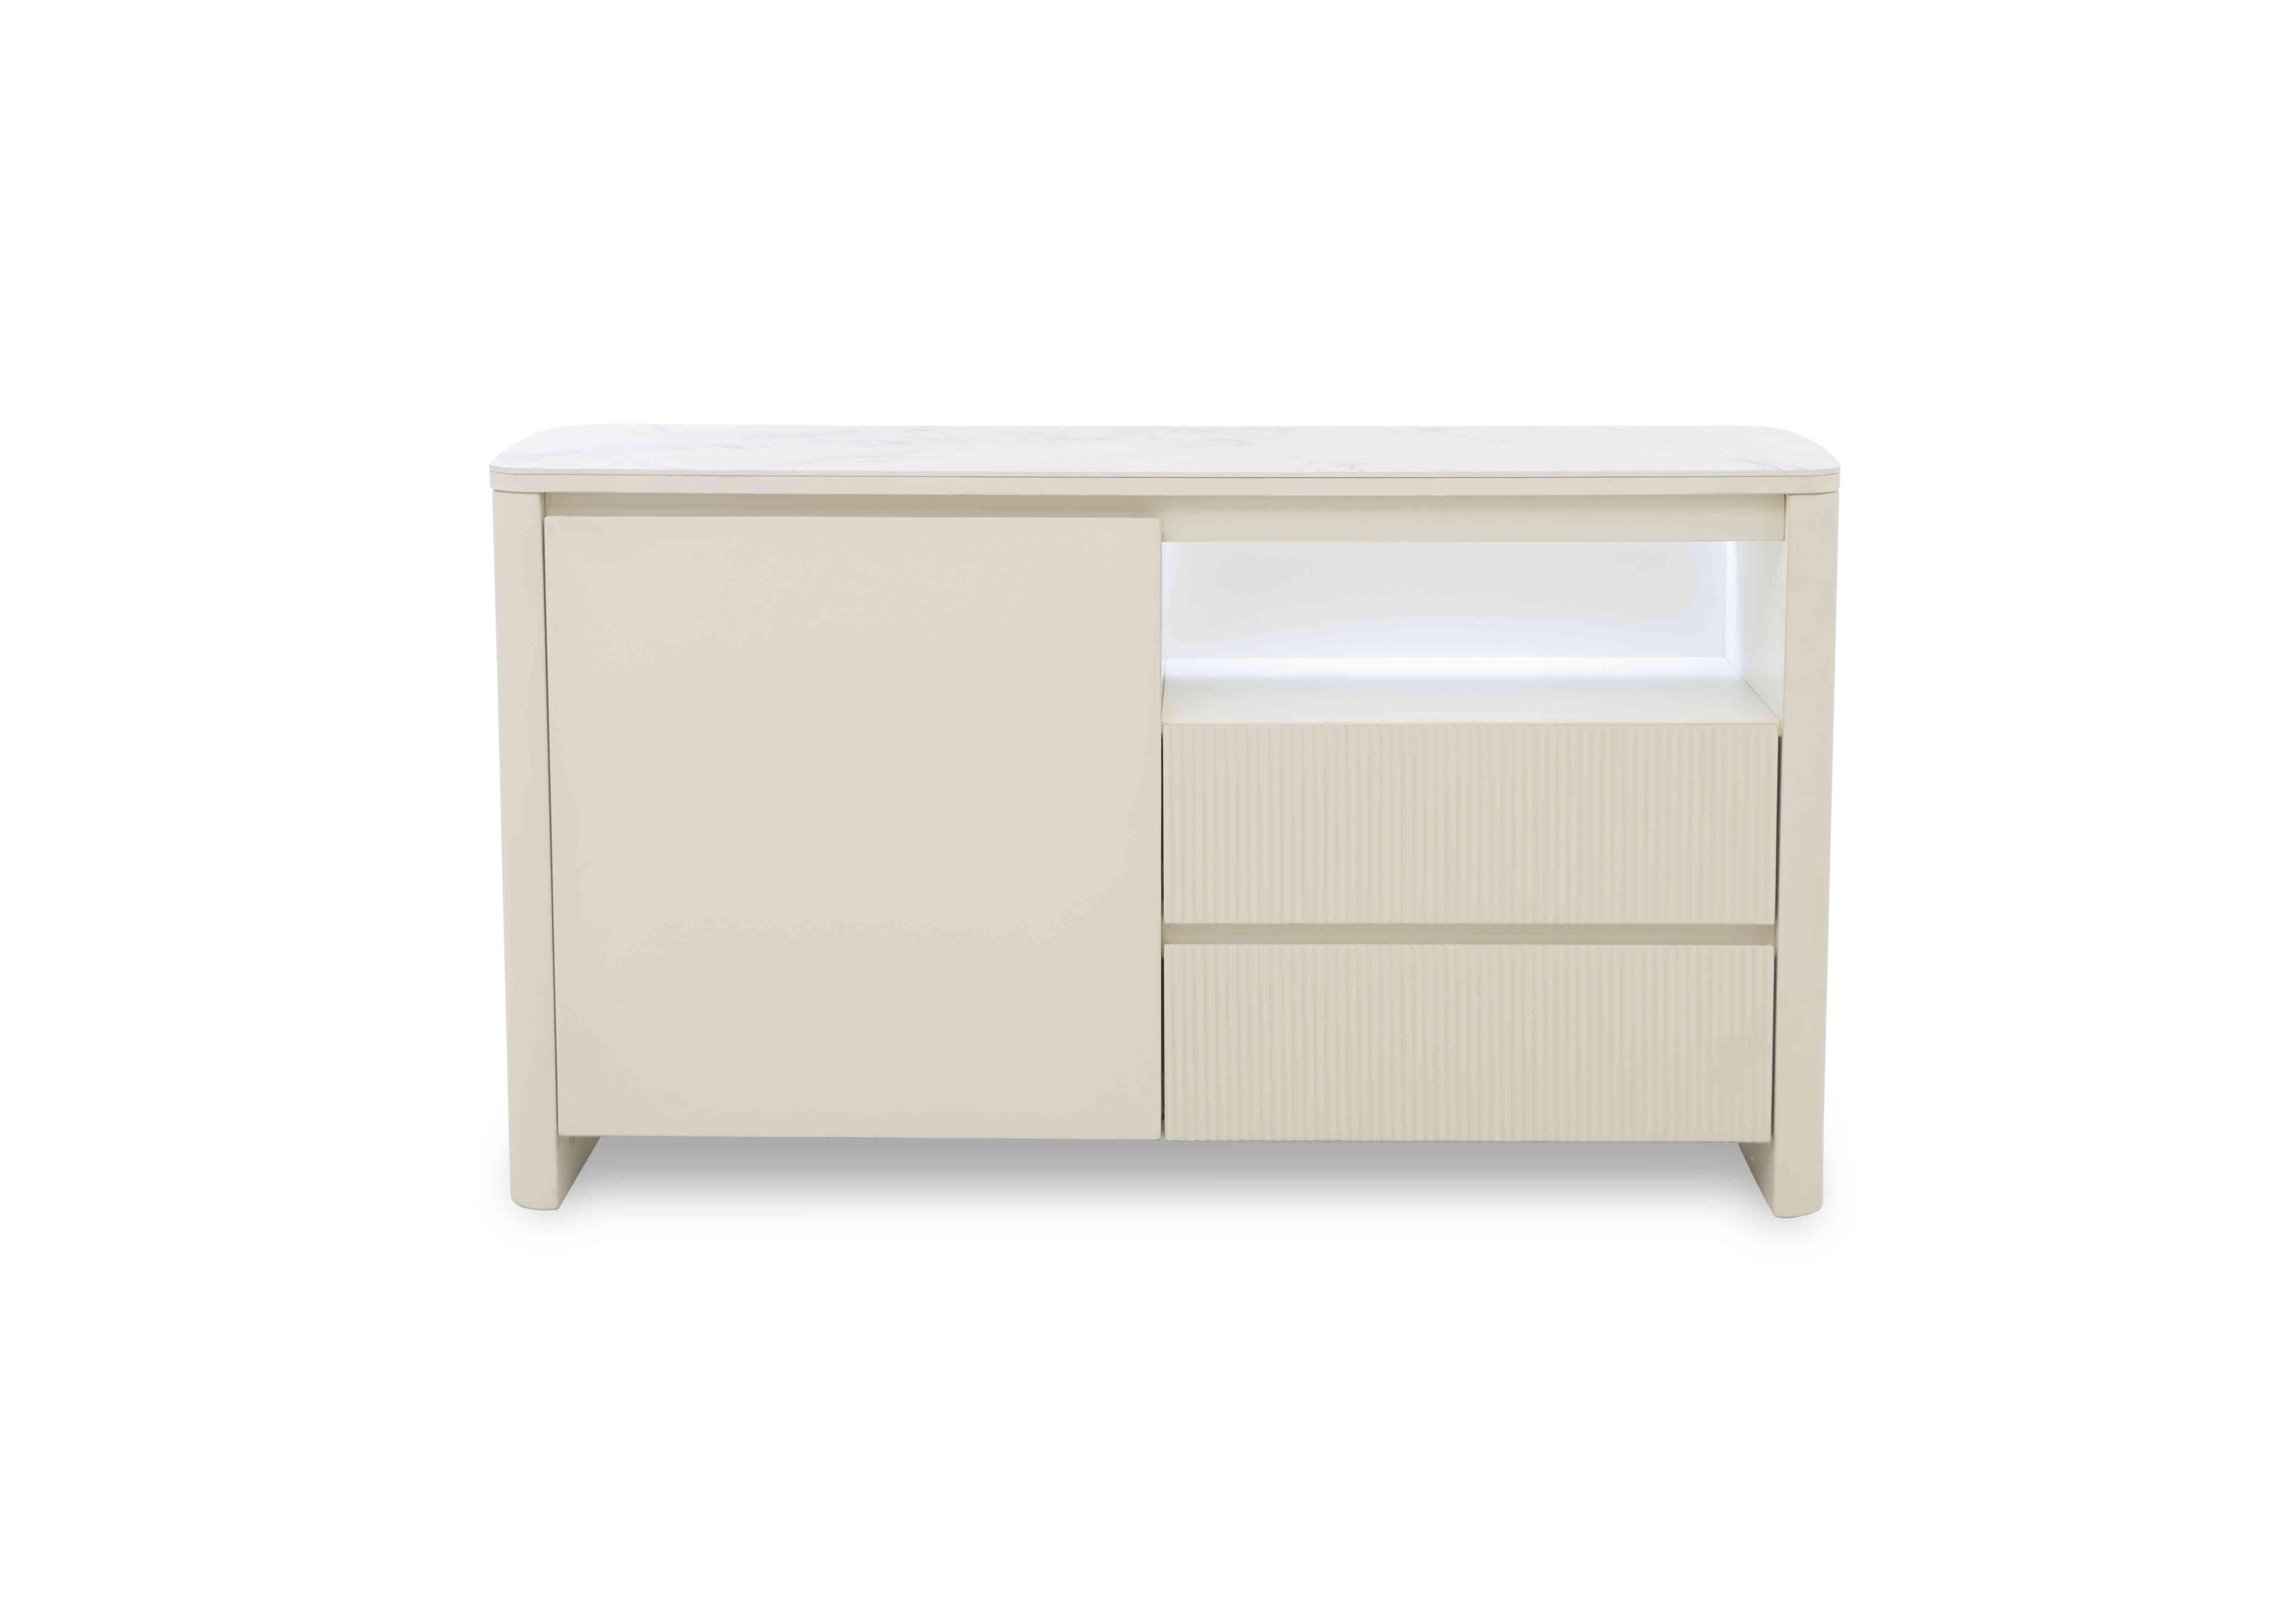 Avorio Small Sideboard with LED lighting in  on Furniture Village